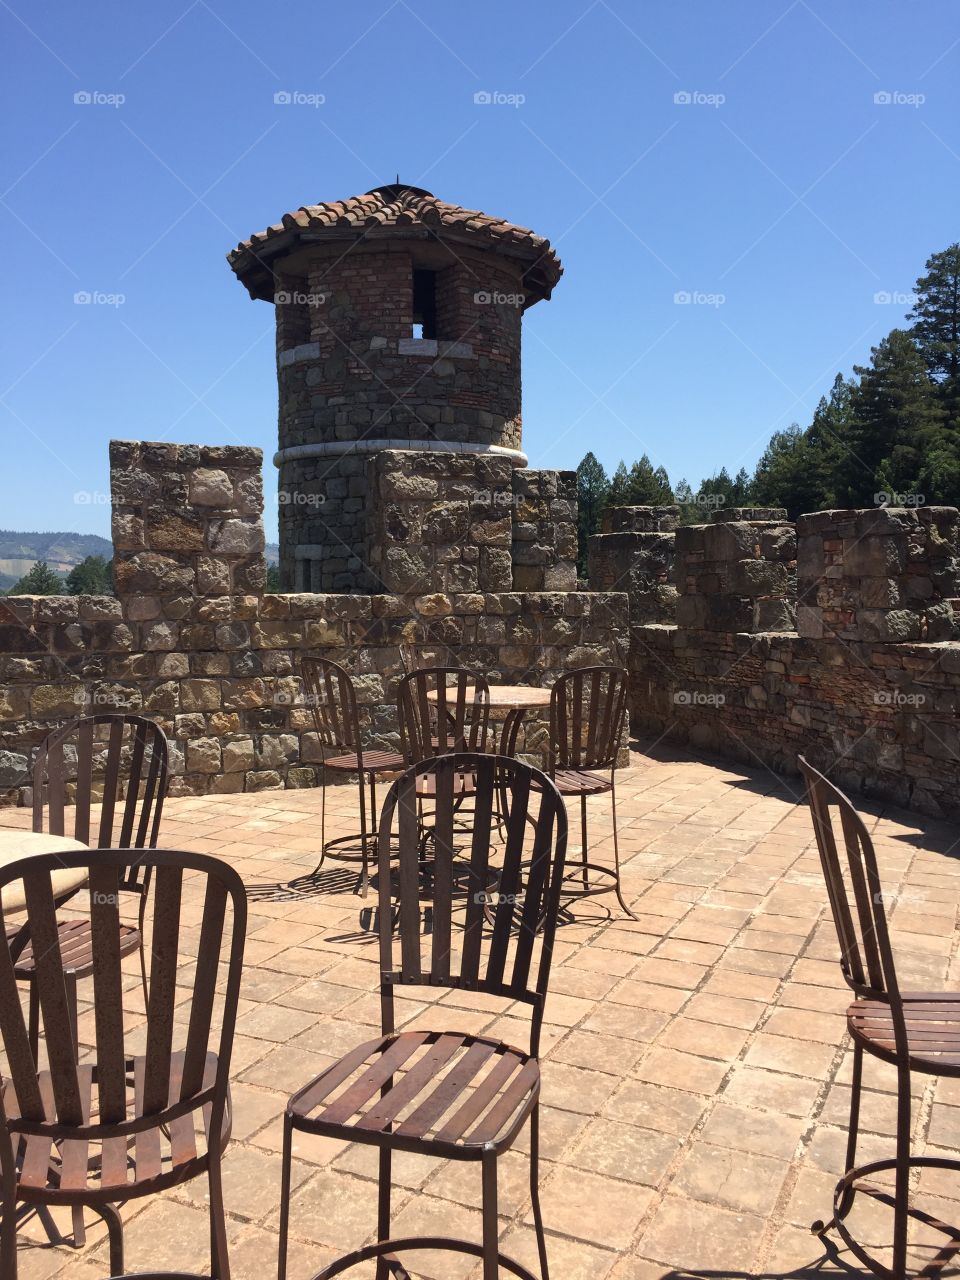 Iron Chairs within a Fortress 